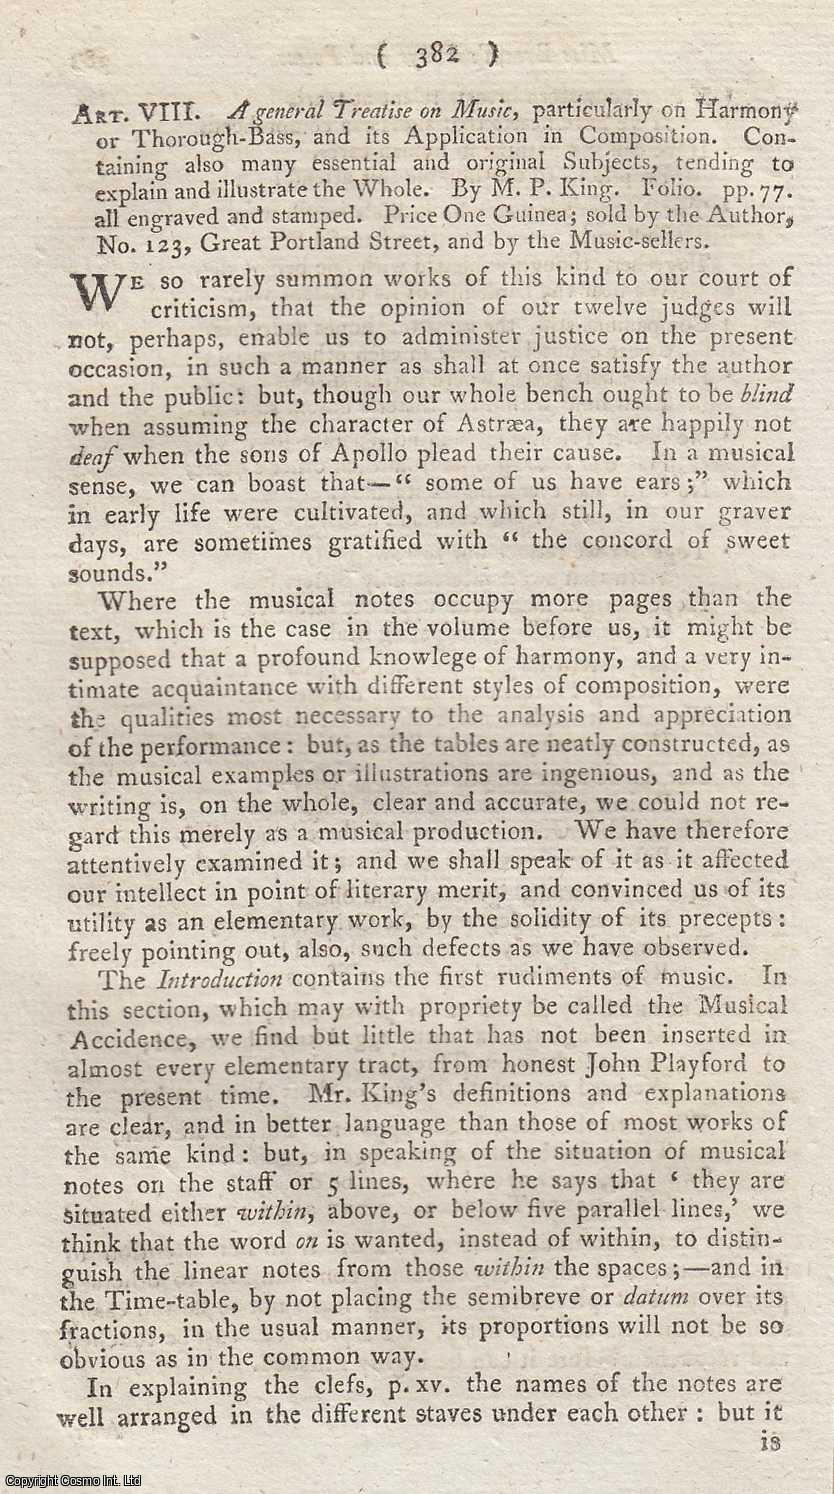 Author Not Stated - A General Treatise on Music, Particularly on Harmony or Thorough-Bass, and its Application in Composition. Containing also Many Essential and Original Subjects. An original article from the Monthly Review, 1800.